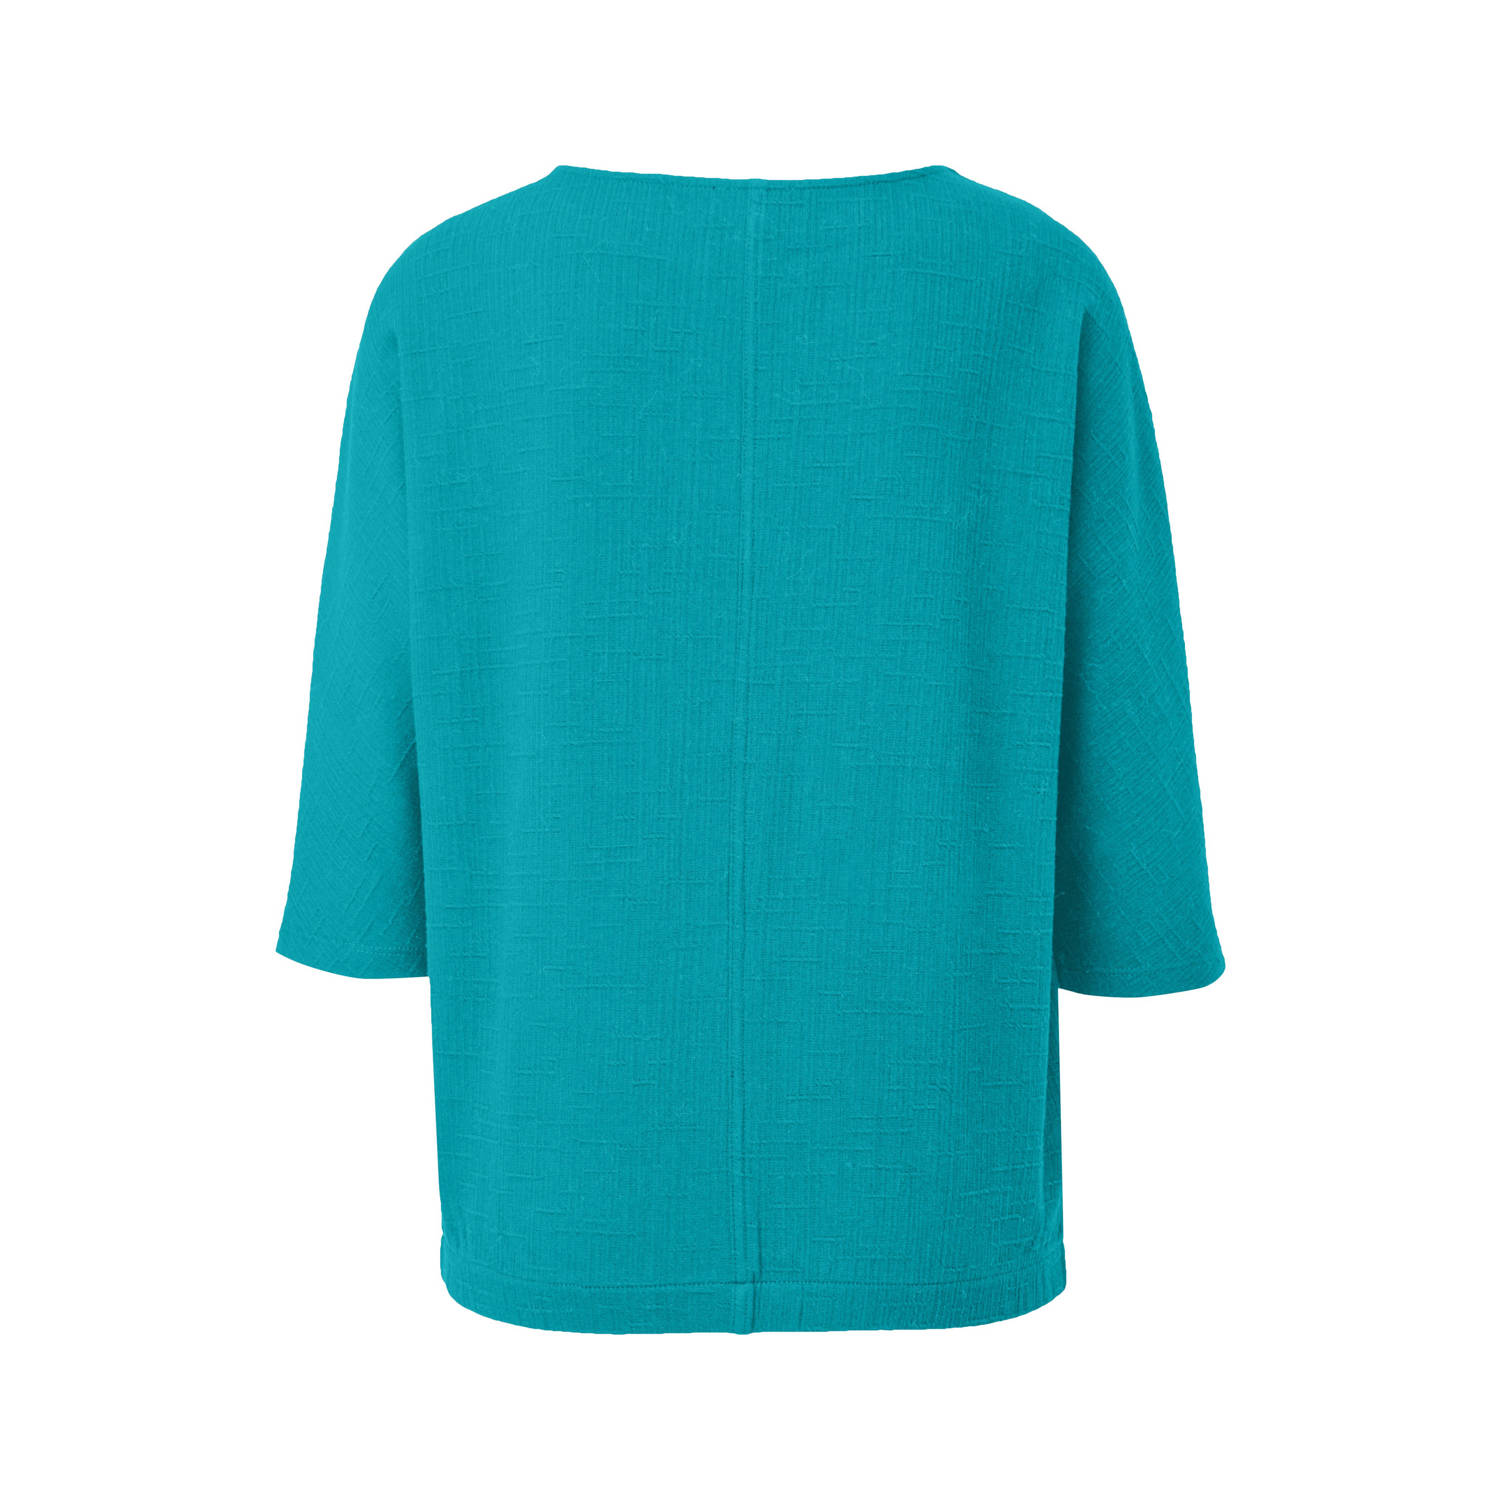 s.Oliver jersey blousetop turquoise